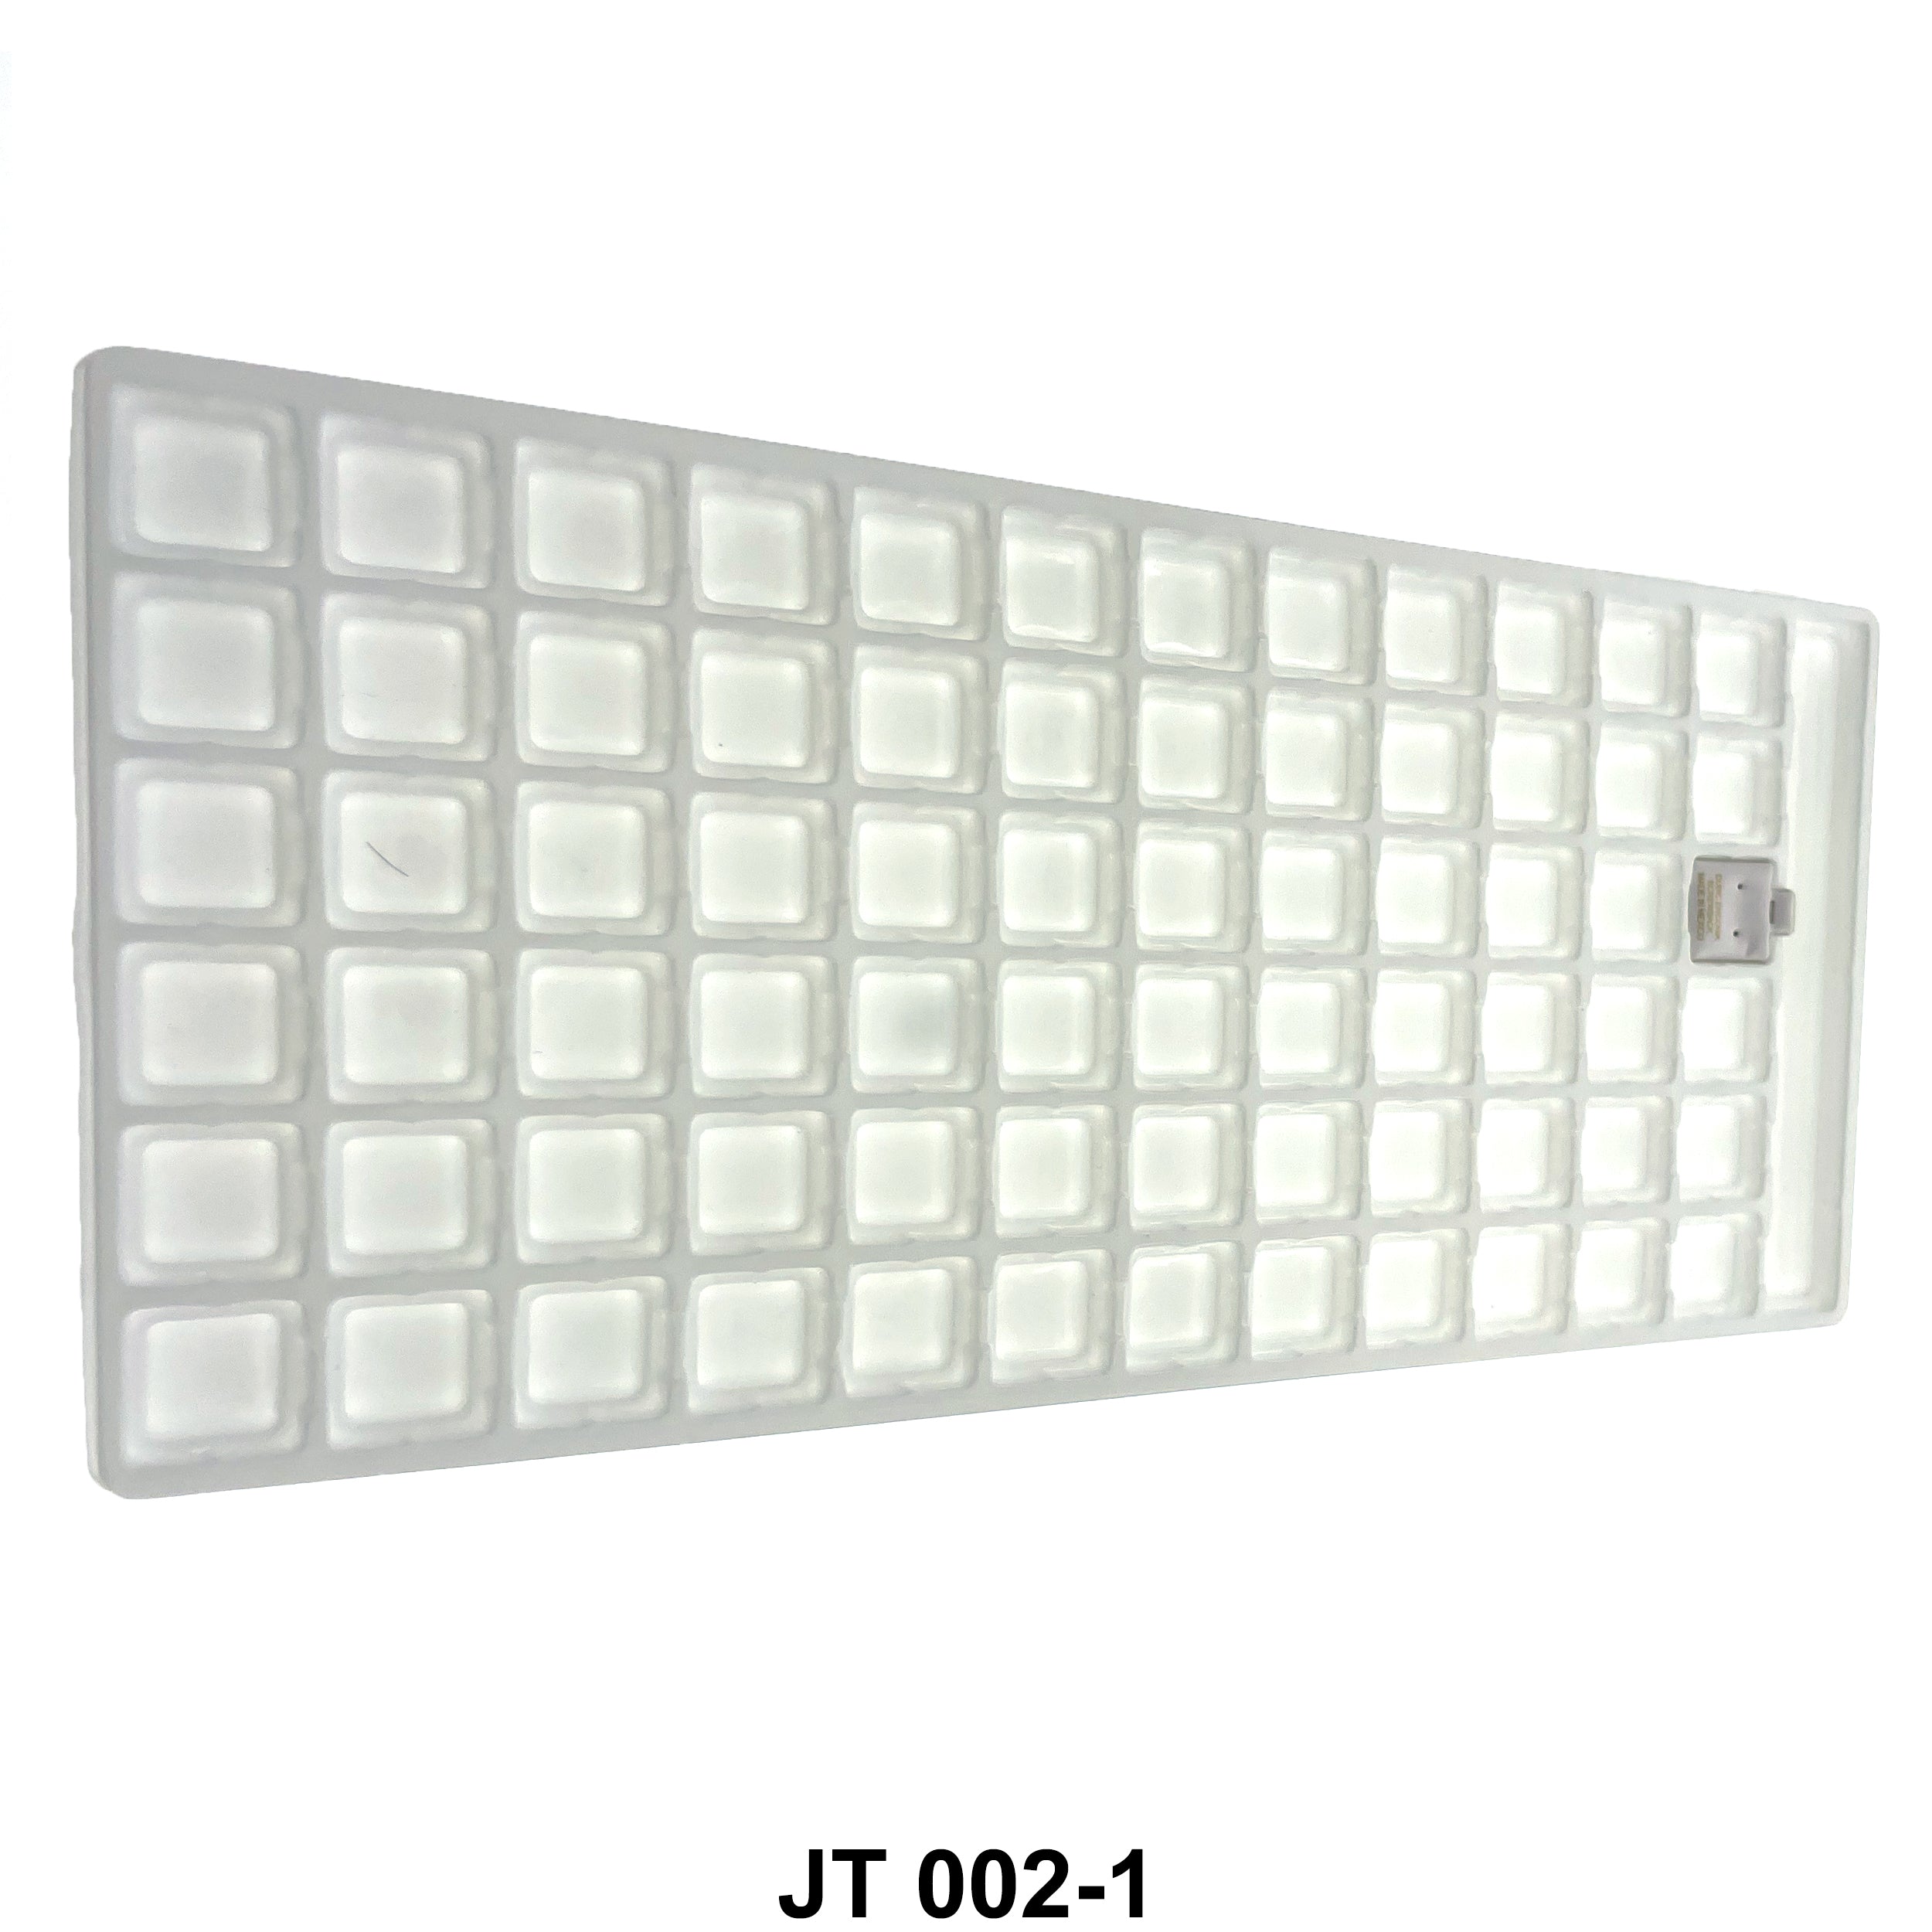 72 Square Cards Tray JT 002-1